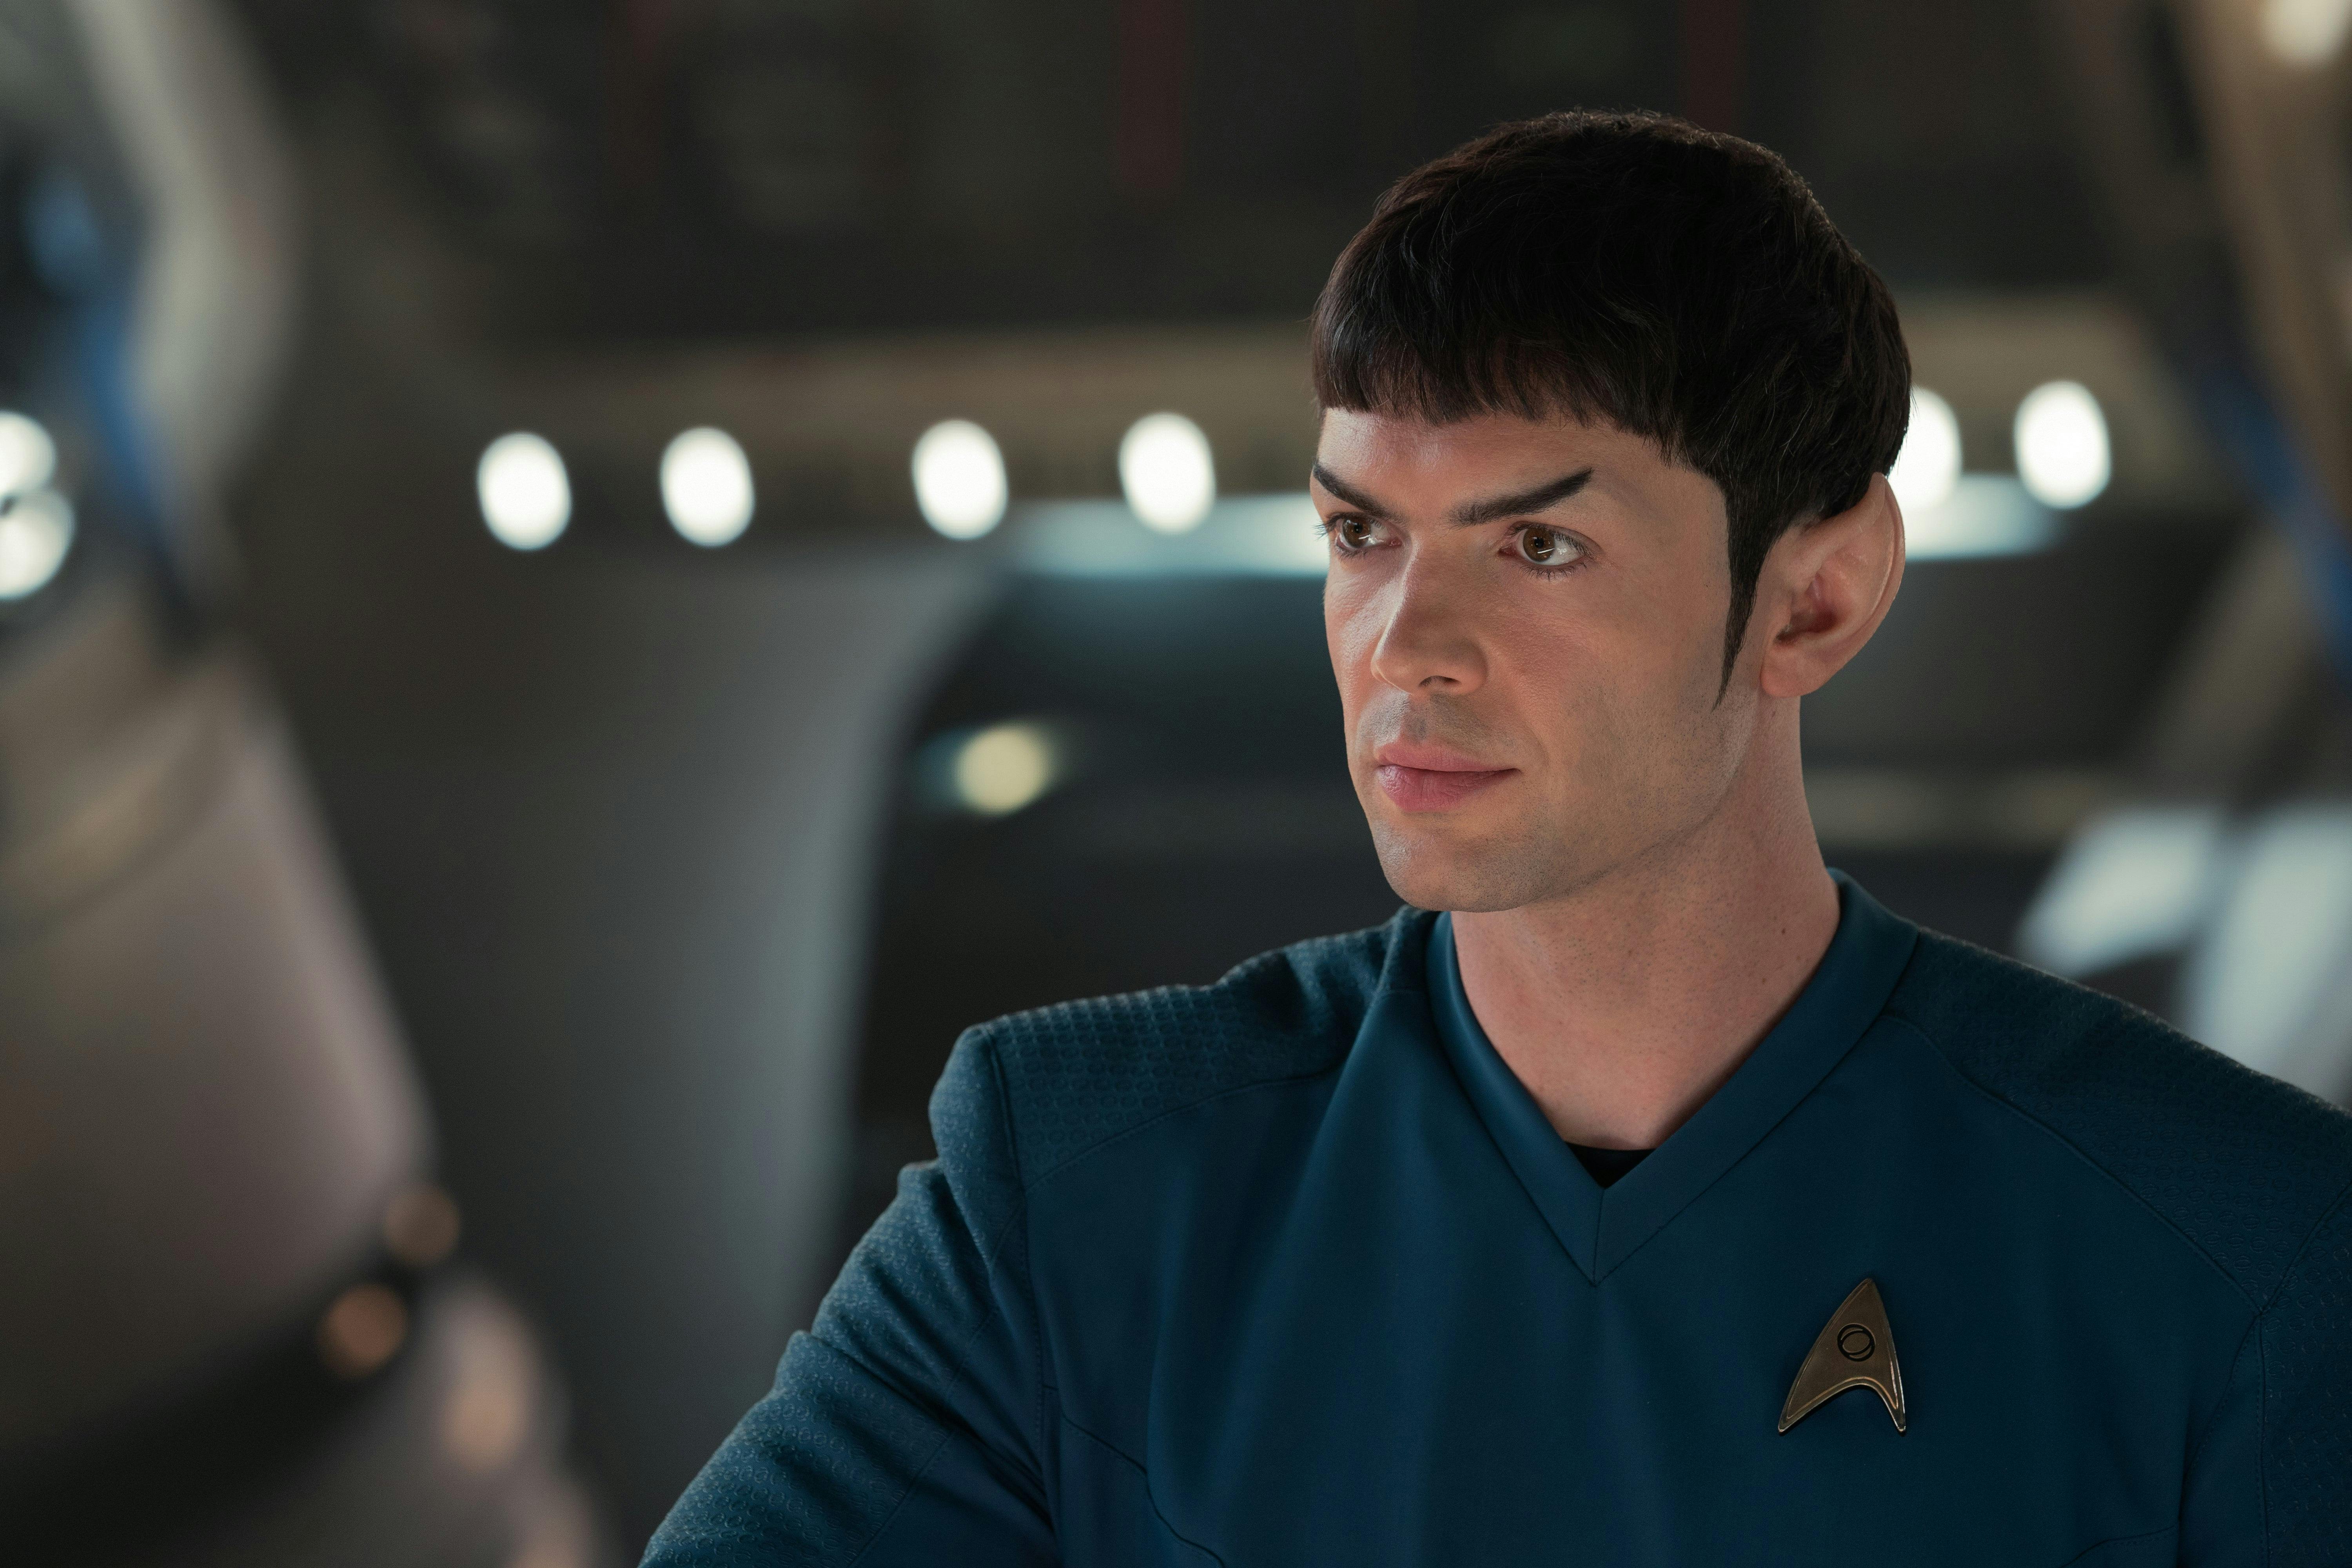 Spock (Strange New Worlds) is sitting at an unknown location. He is looking to the right side of the image.